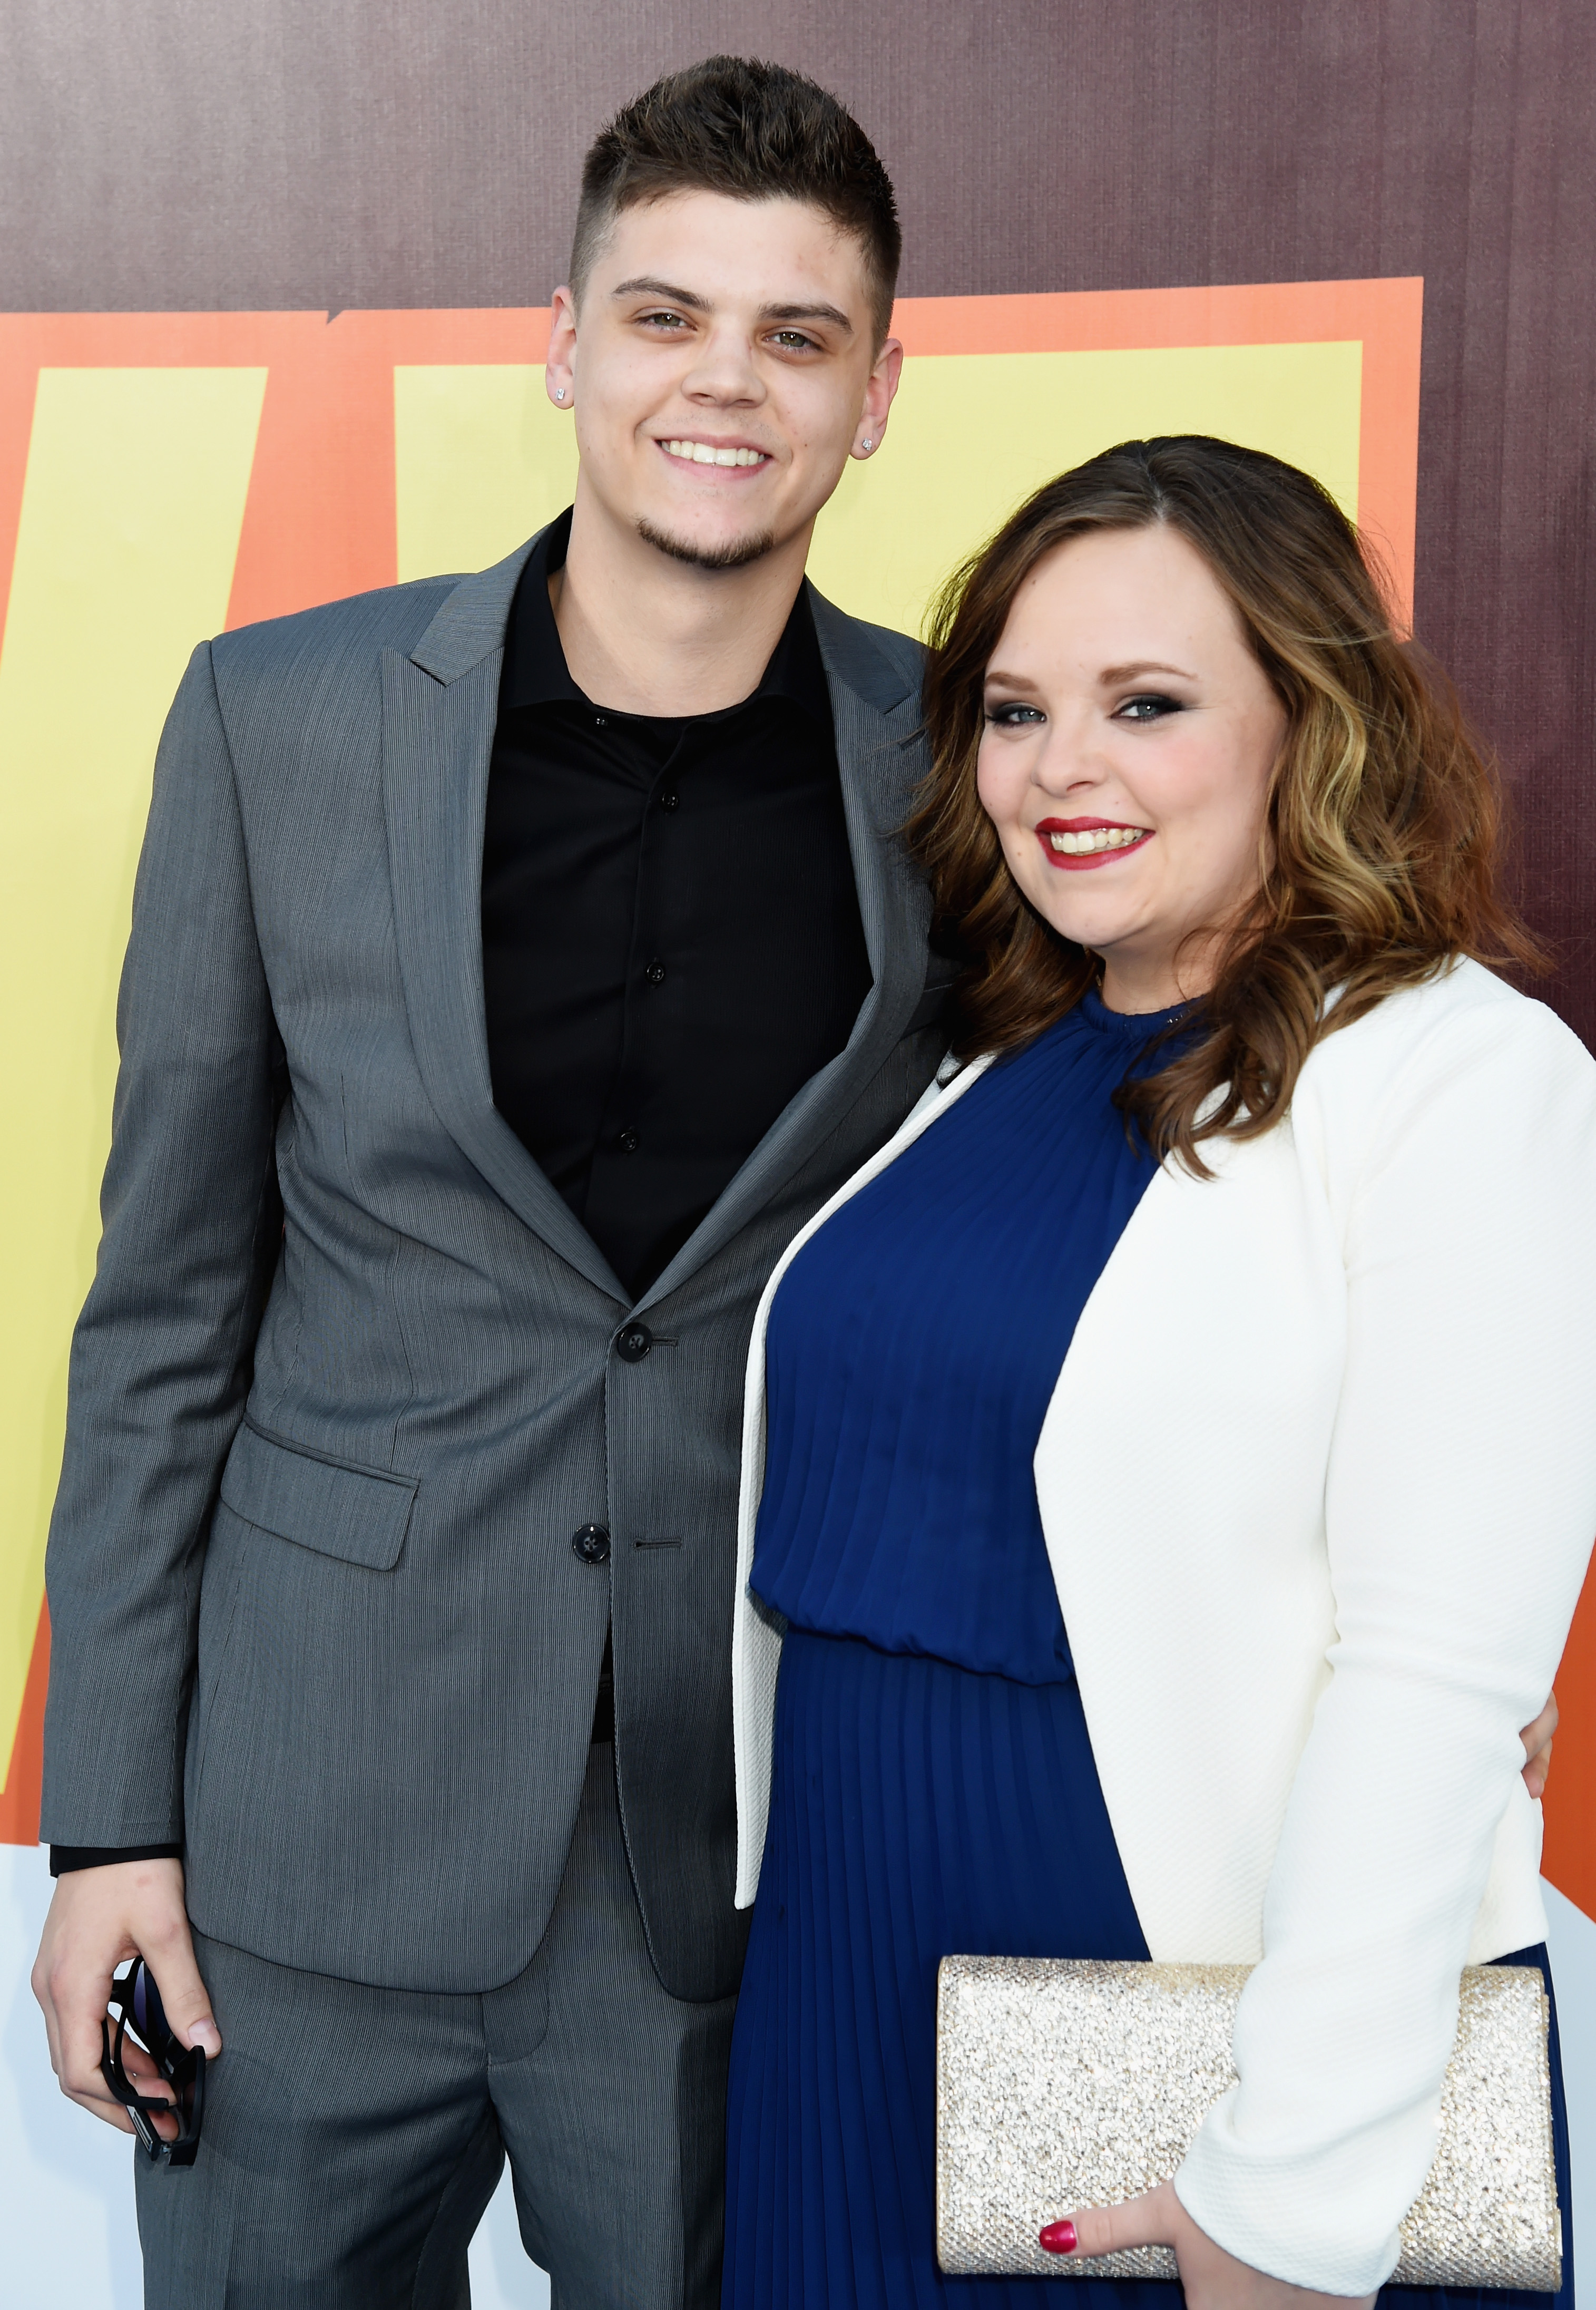 TV personalities Tyler Baltierra and Catelynn Lowell attend the 2015 MTV Movie Awards on April 12, 2015 in Los Angeles.